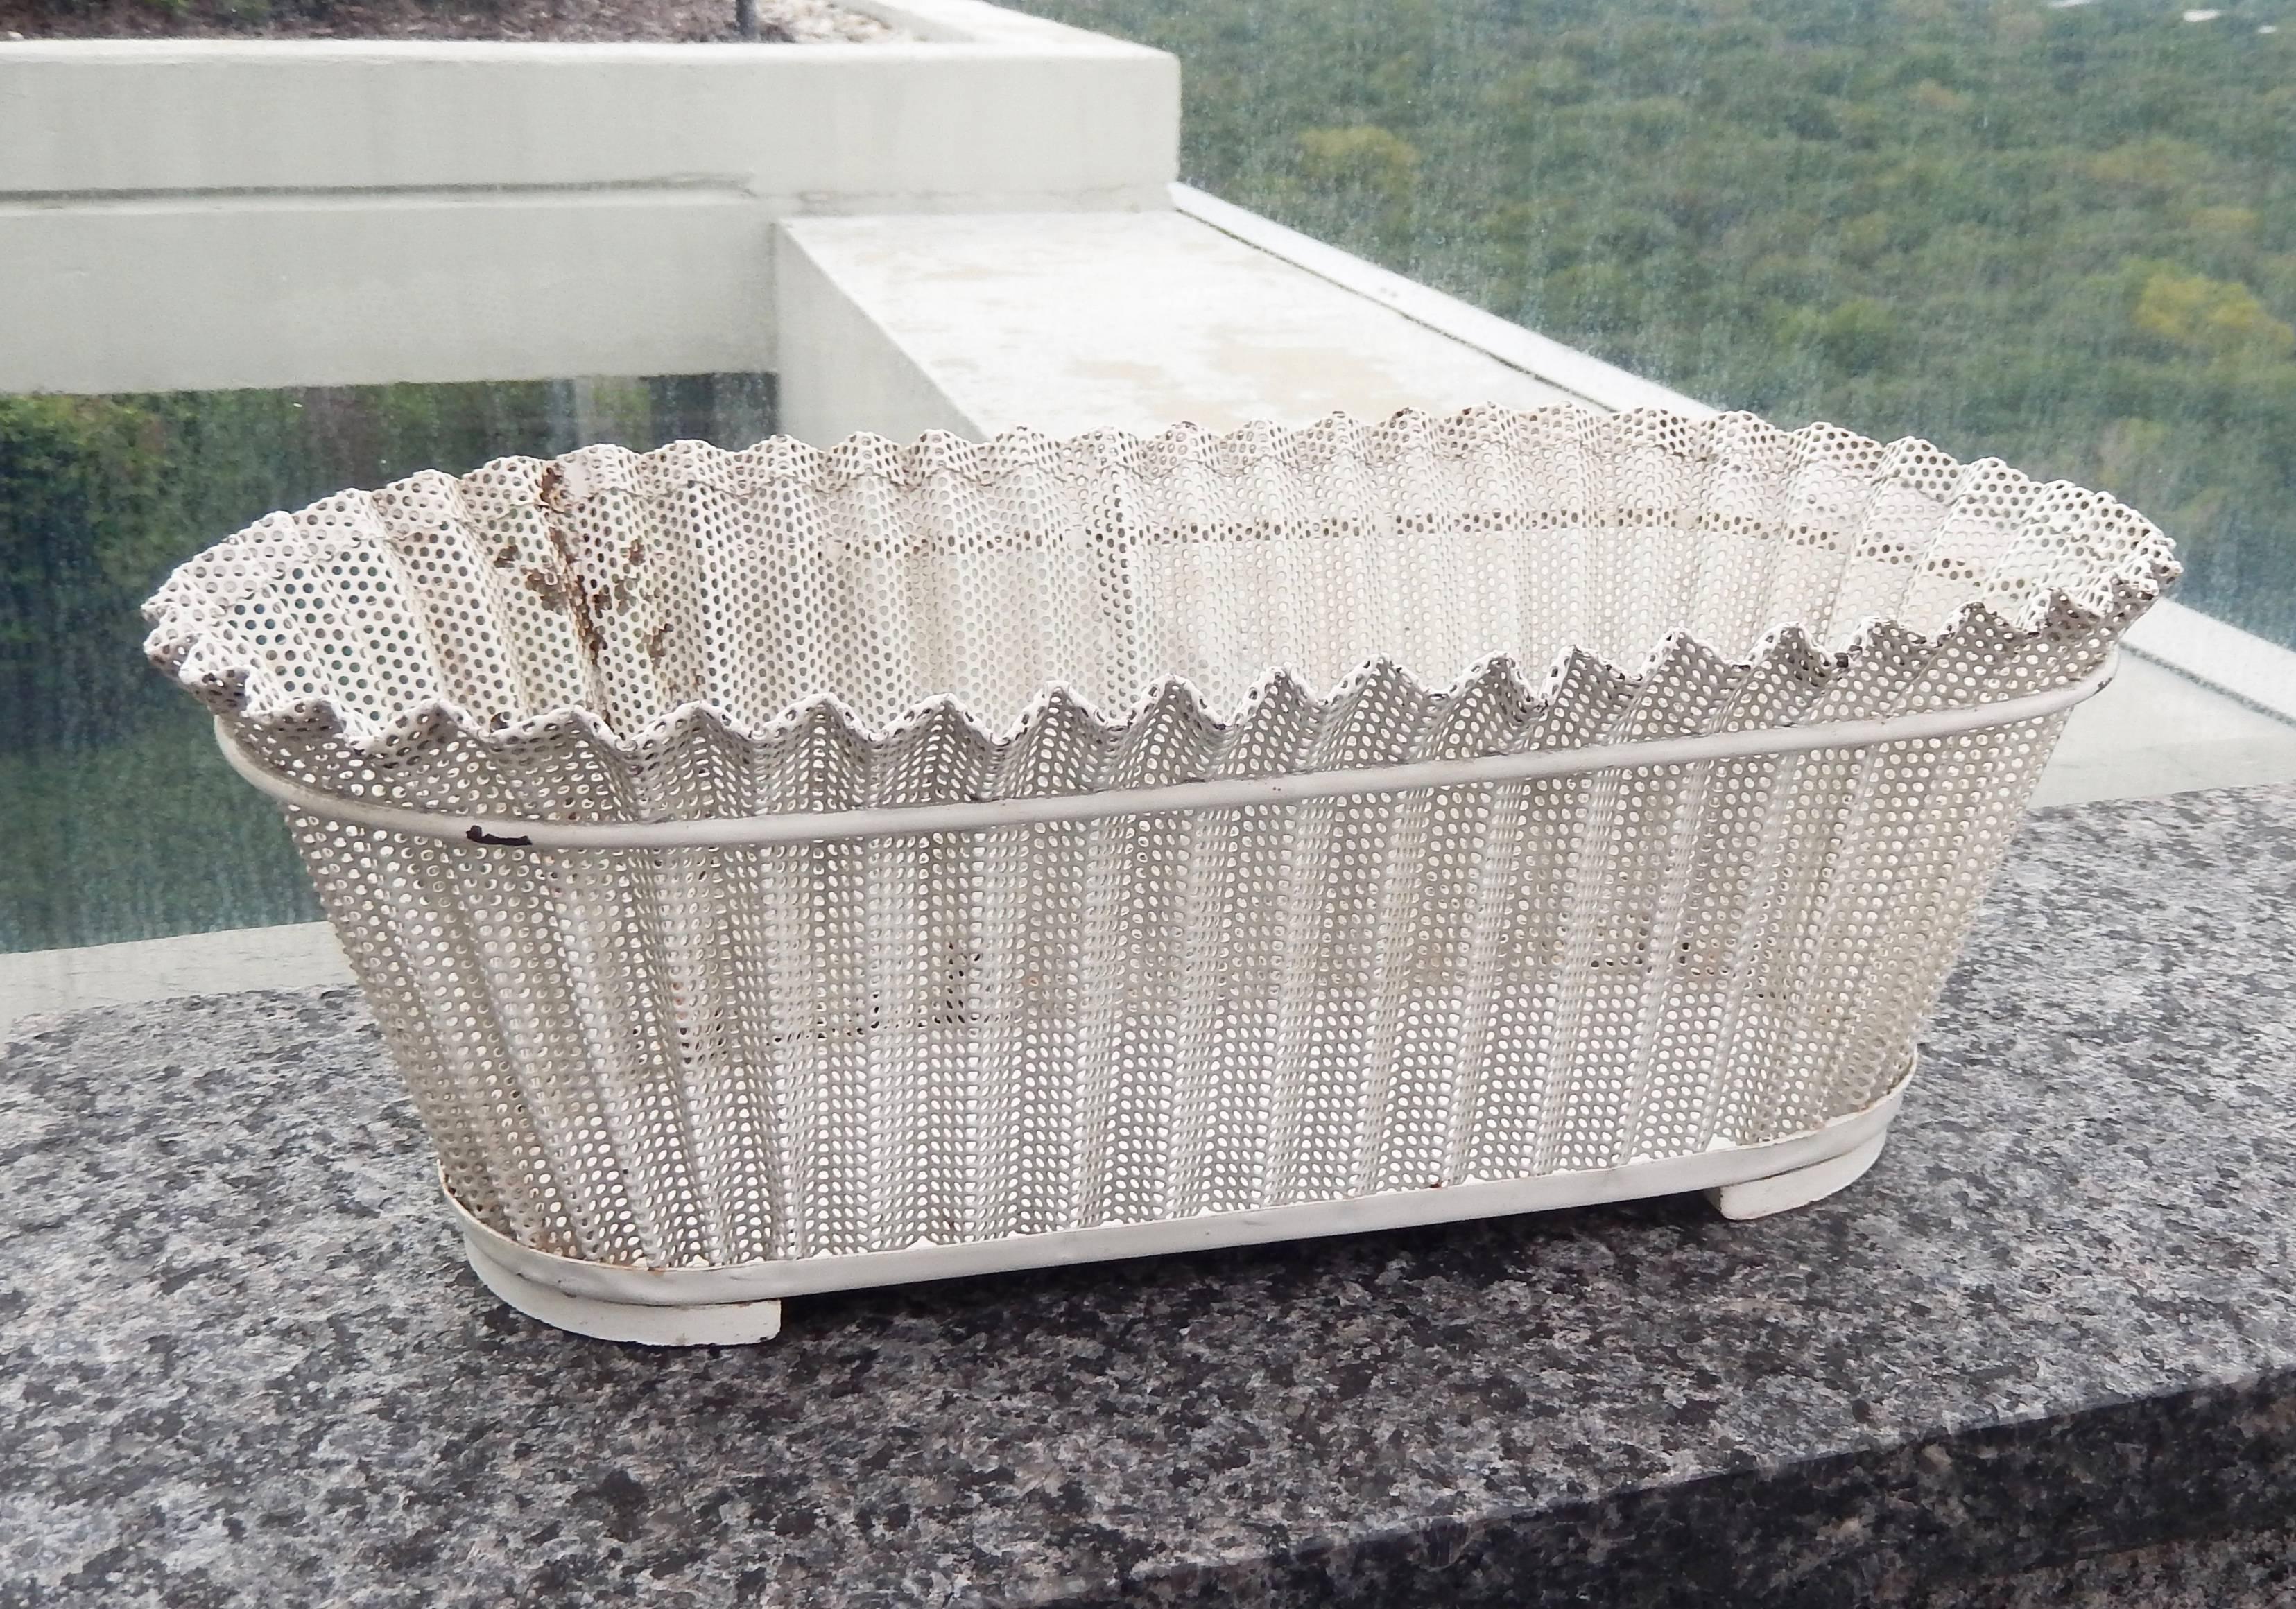 A chic, perforated metal flower basket (jardiniere rigitulle) by the modernist French designer Mathieu Matégot (1910-2001). Mategot pioneered the use of perforated sheet metal and lacquered steel in his furniture and decorative objects. Original